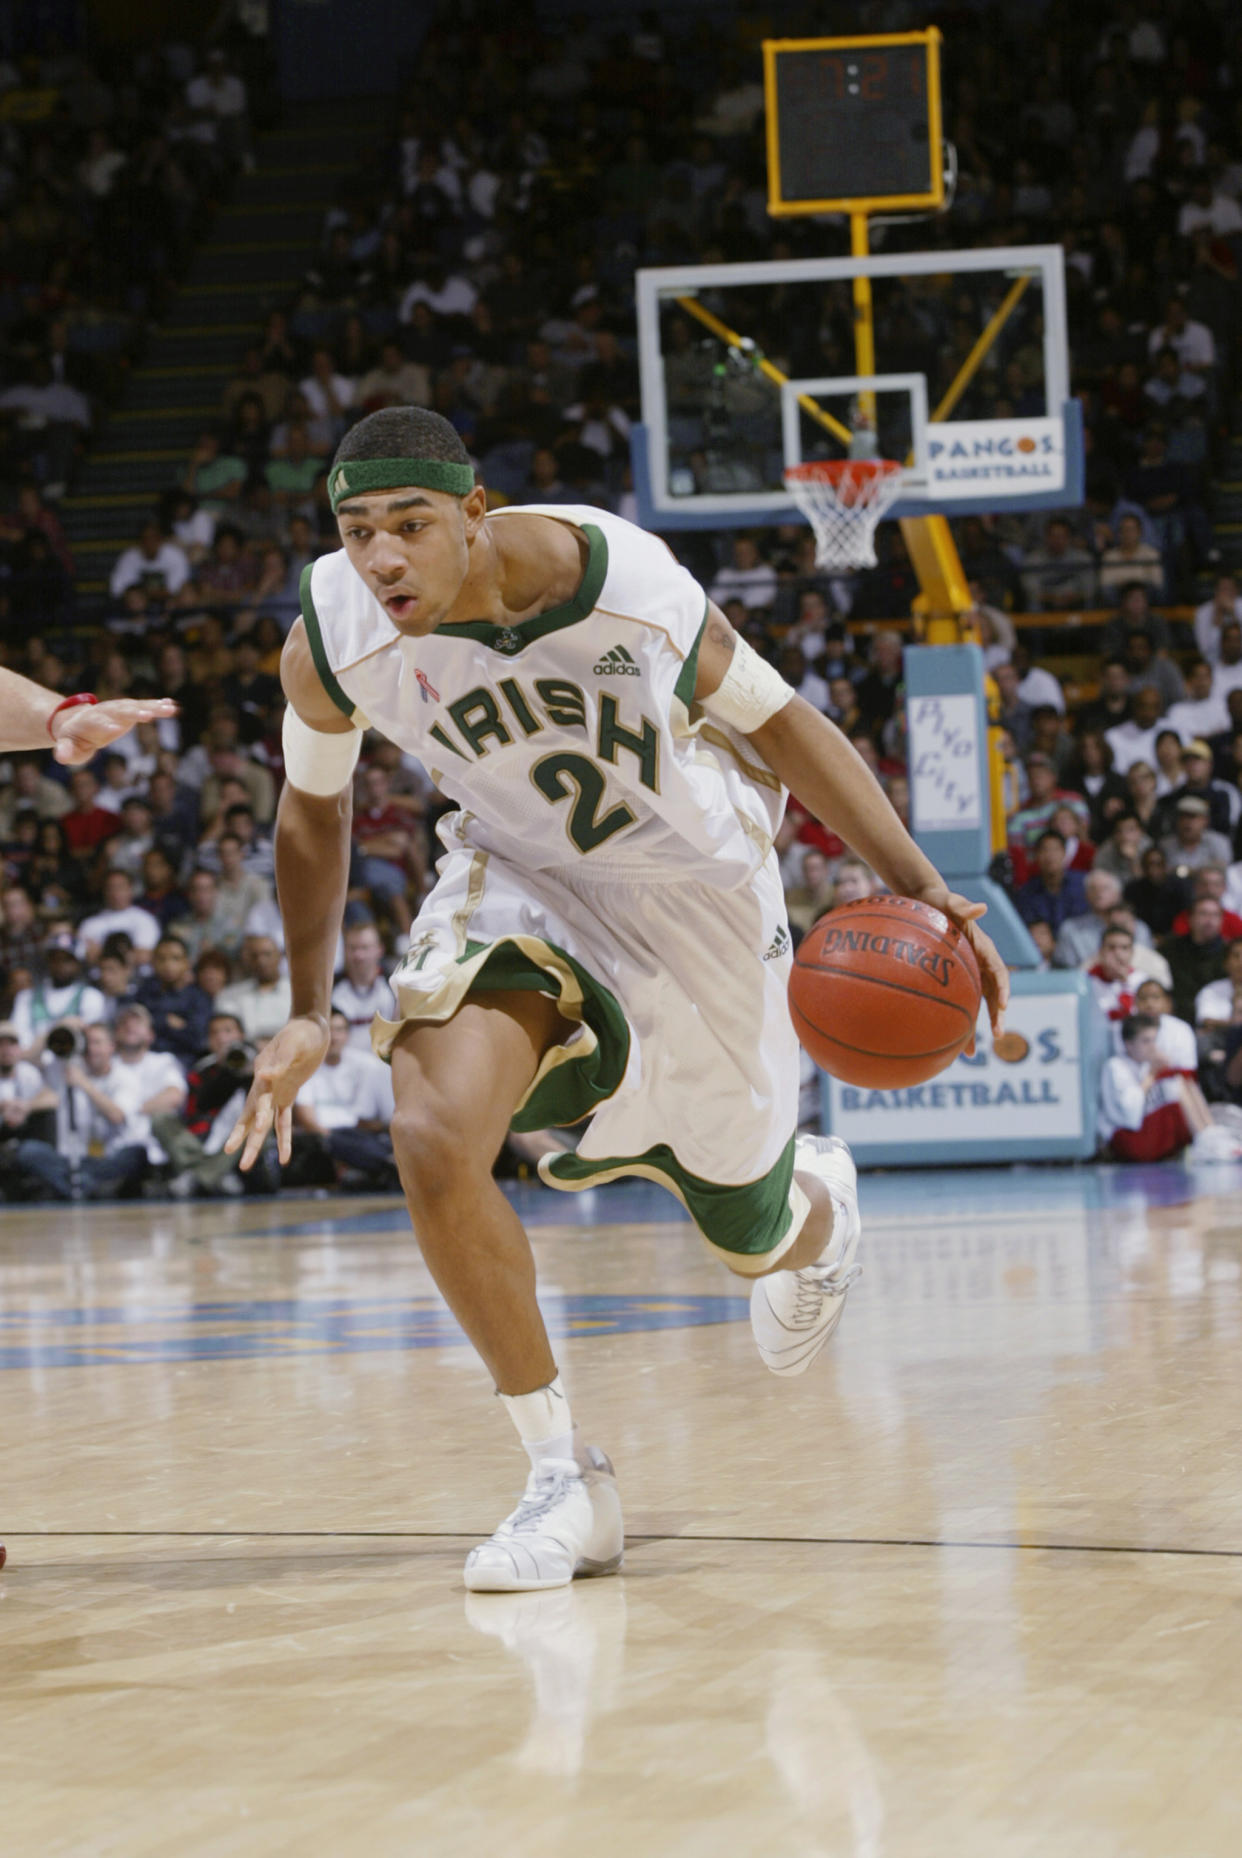  Romeo Travis #24 of St. Vincent-St. Mary High School moves the ball forward against Mater Dei High School during the Ninth Pangos Dream Classic at Pauley Pavilion on the UCLA campus on January 4, 2003 in Los Angeles, California.  St. Vincent-St. Mary won 64-58.  (Photo by Stephen Dunn/Getty Images)